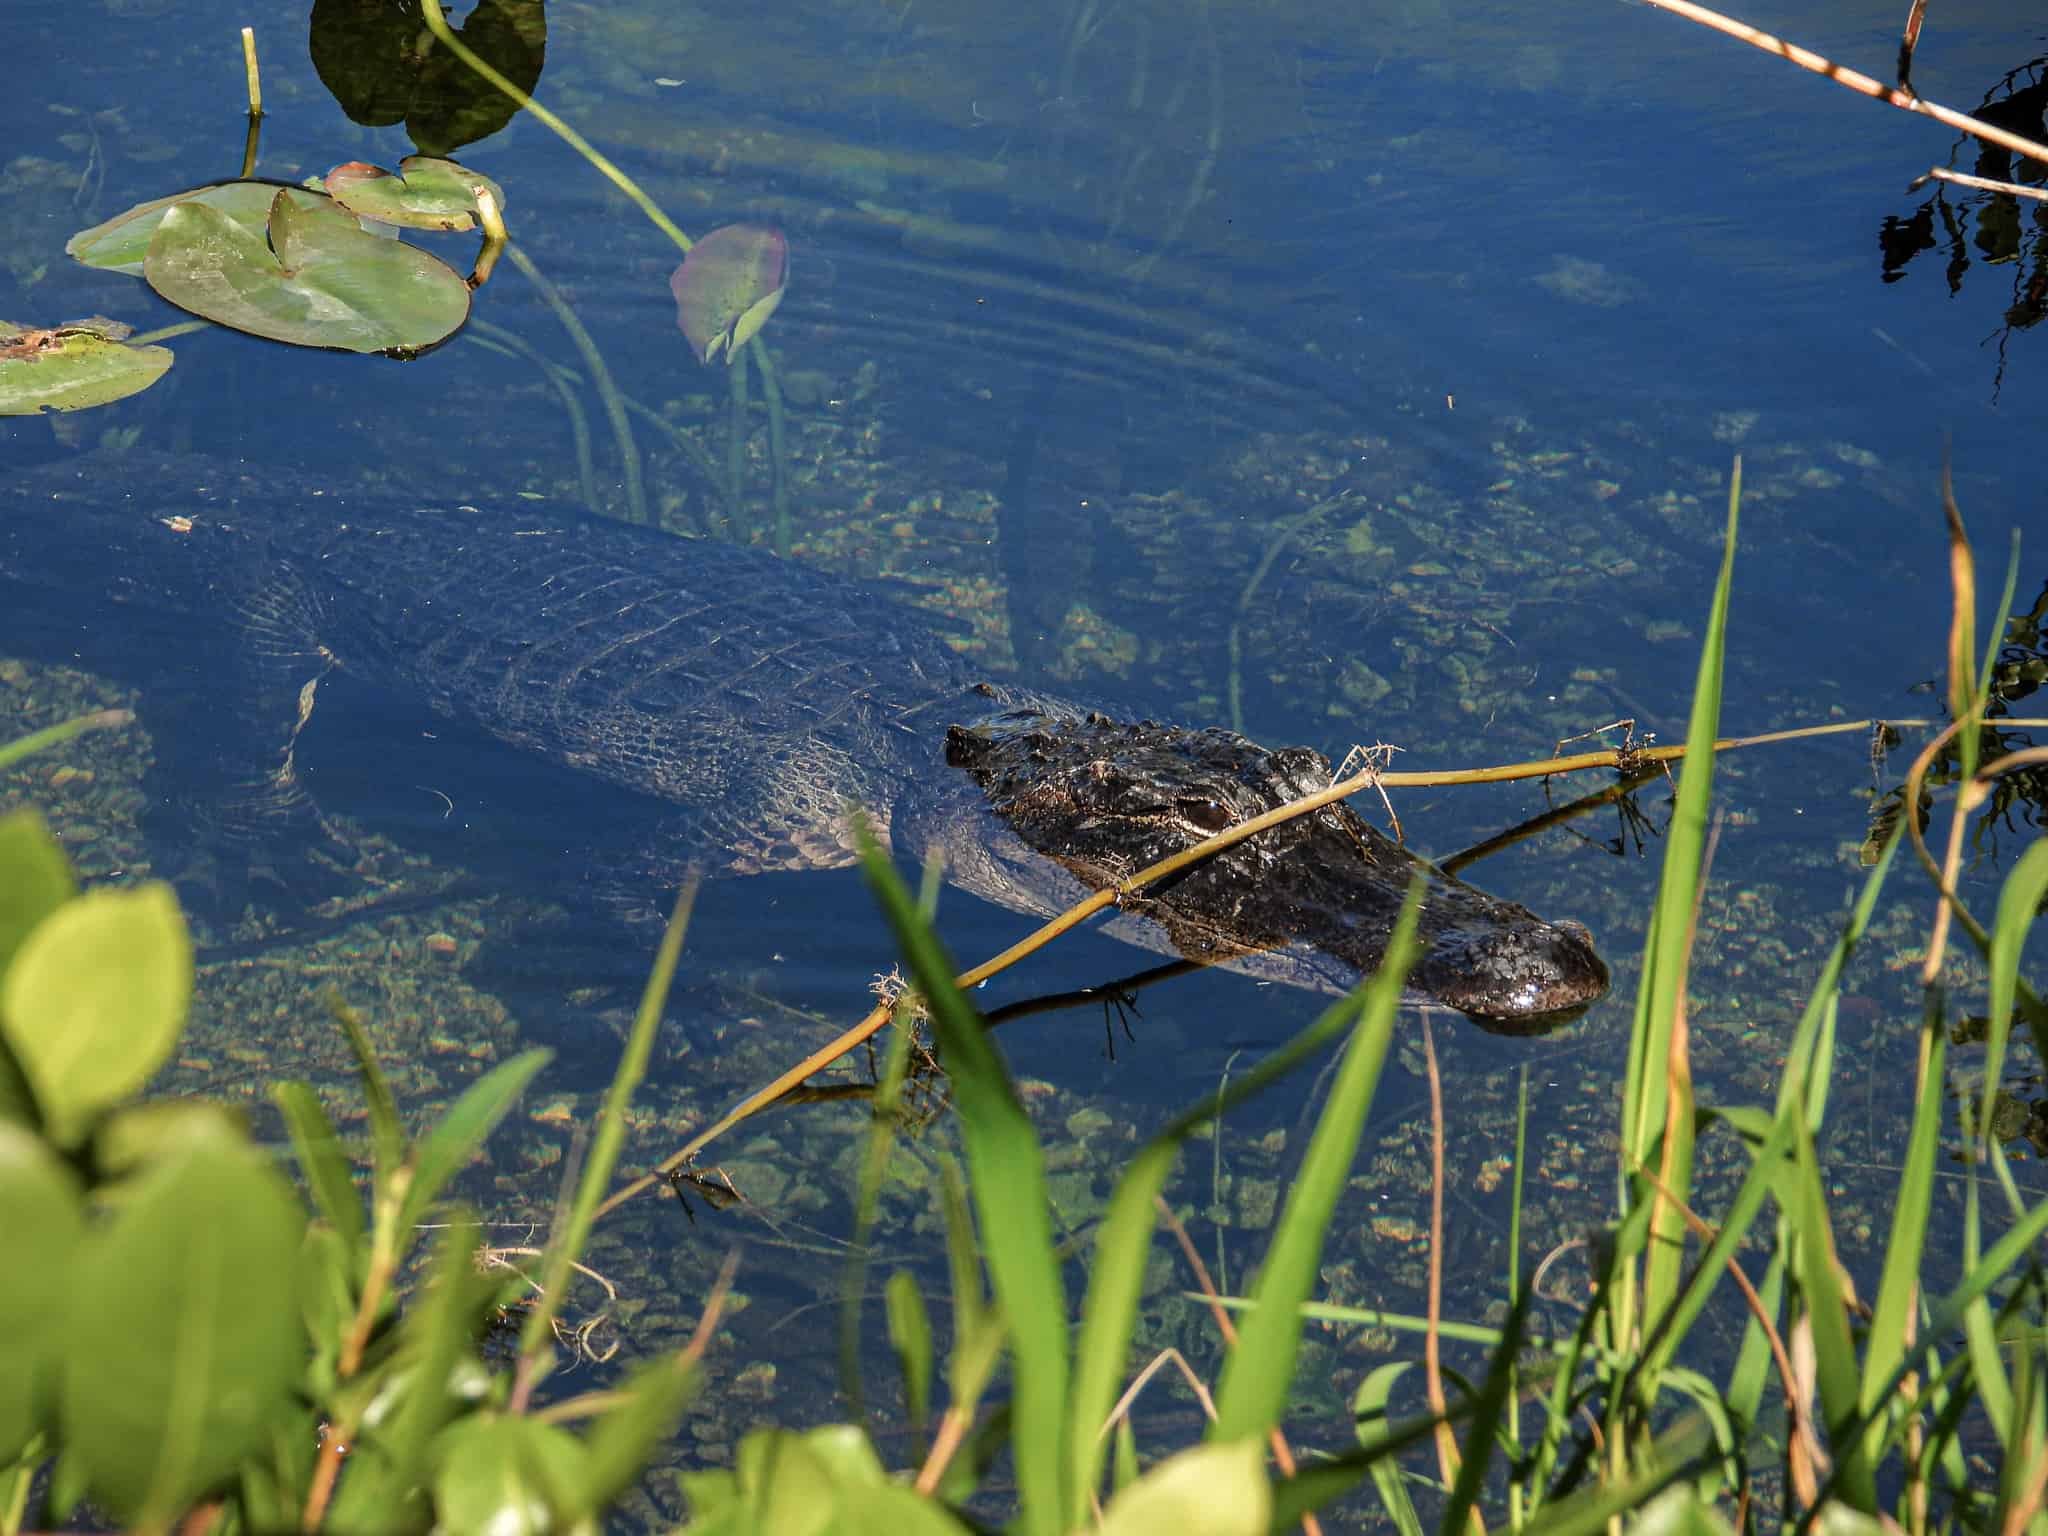 Should You Take Your Baby to the Everglades?